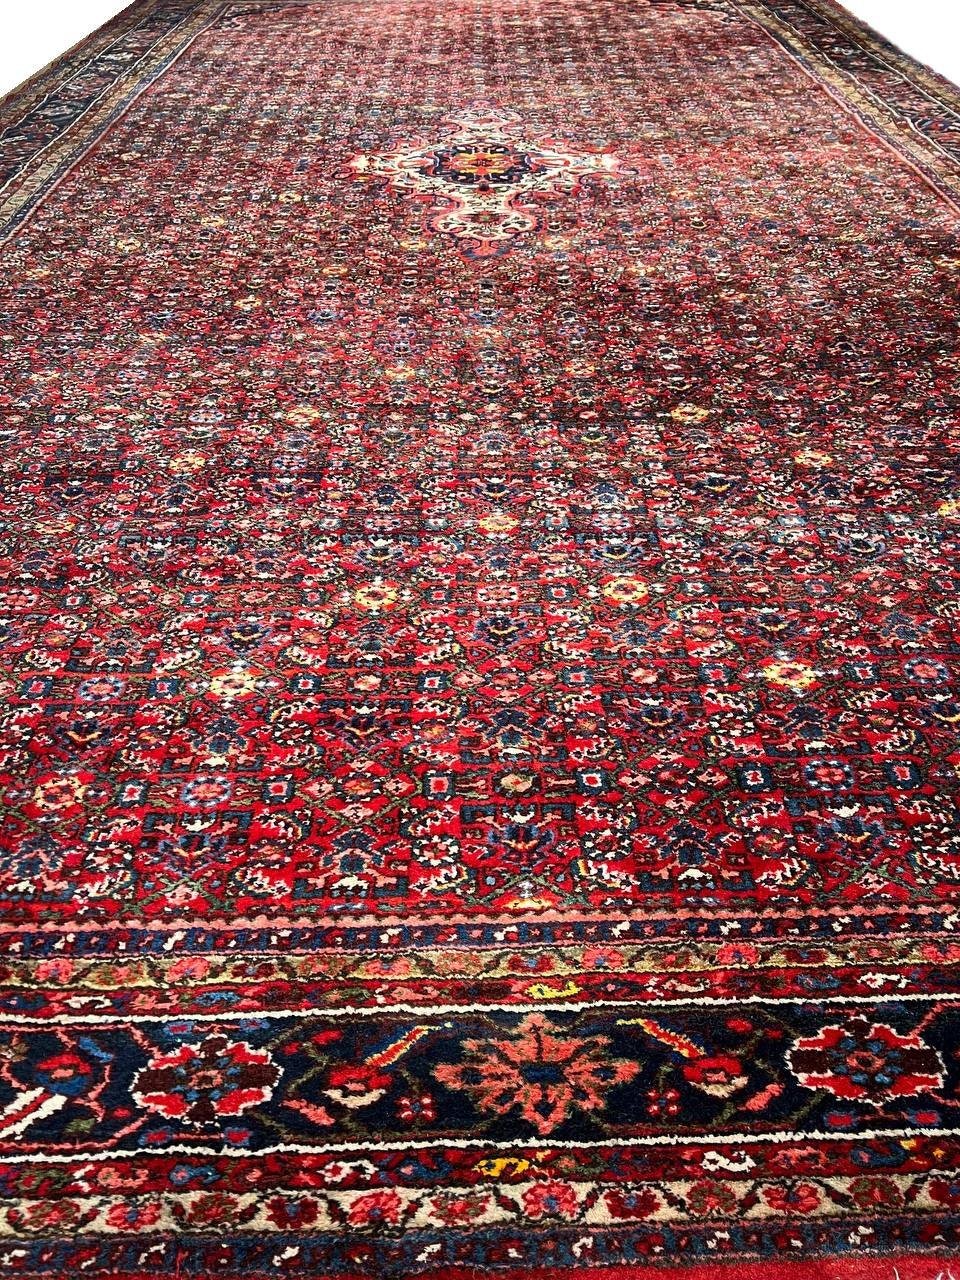 Canvello Fine Hand Knotted Silkroad Antique Hossin Abad Rug - 12'5'' X 21'3'' - Canvello